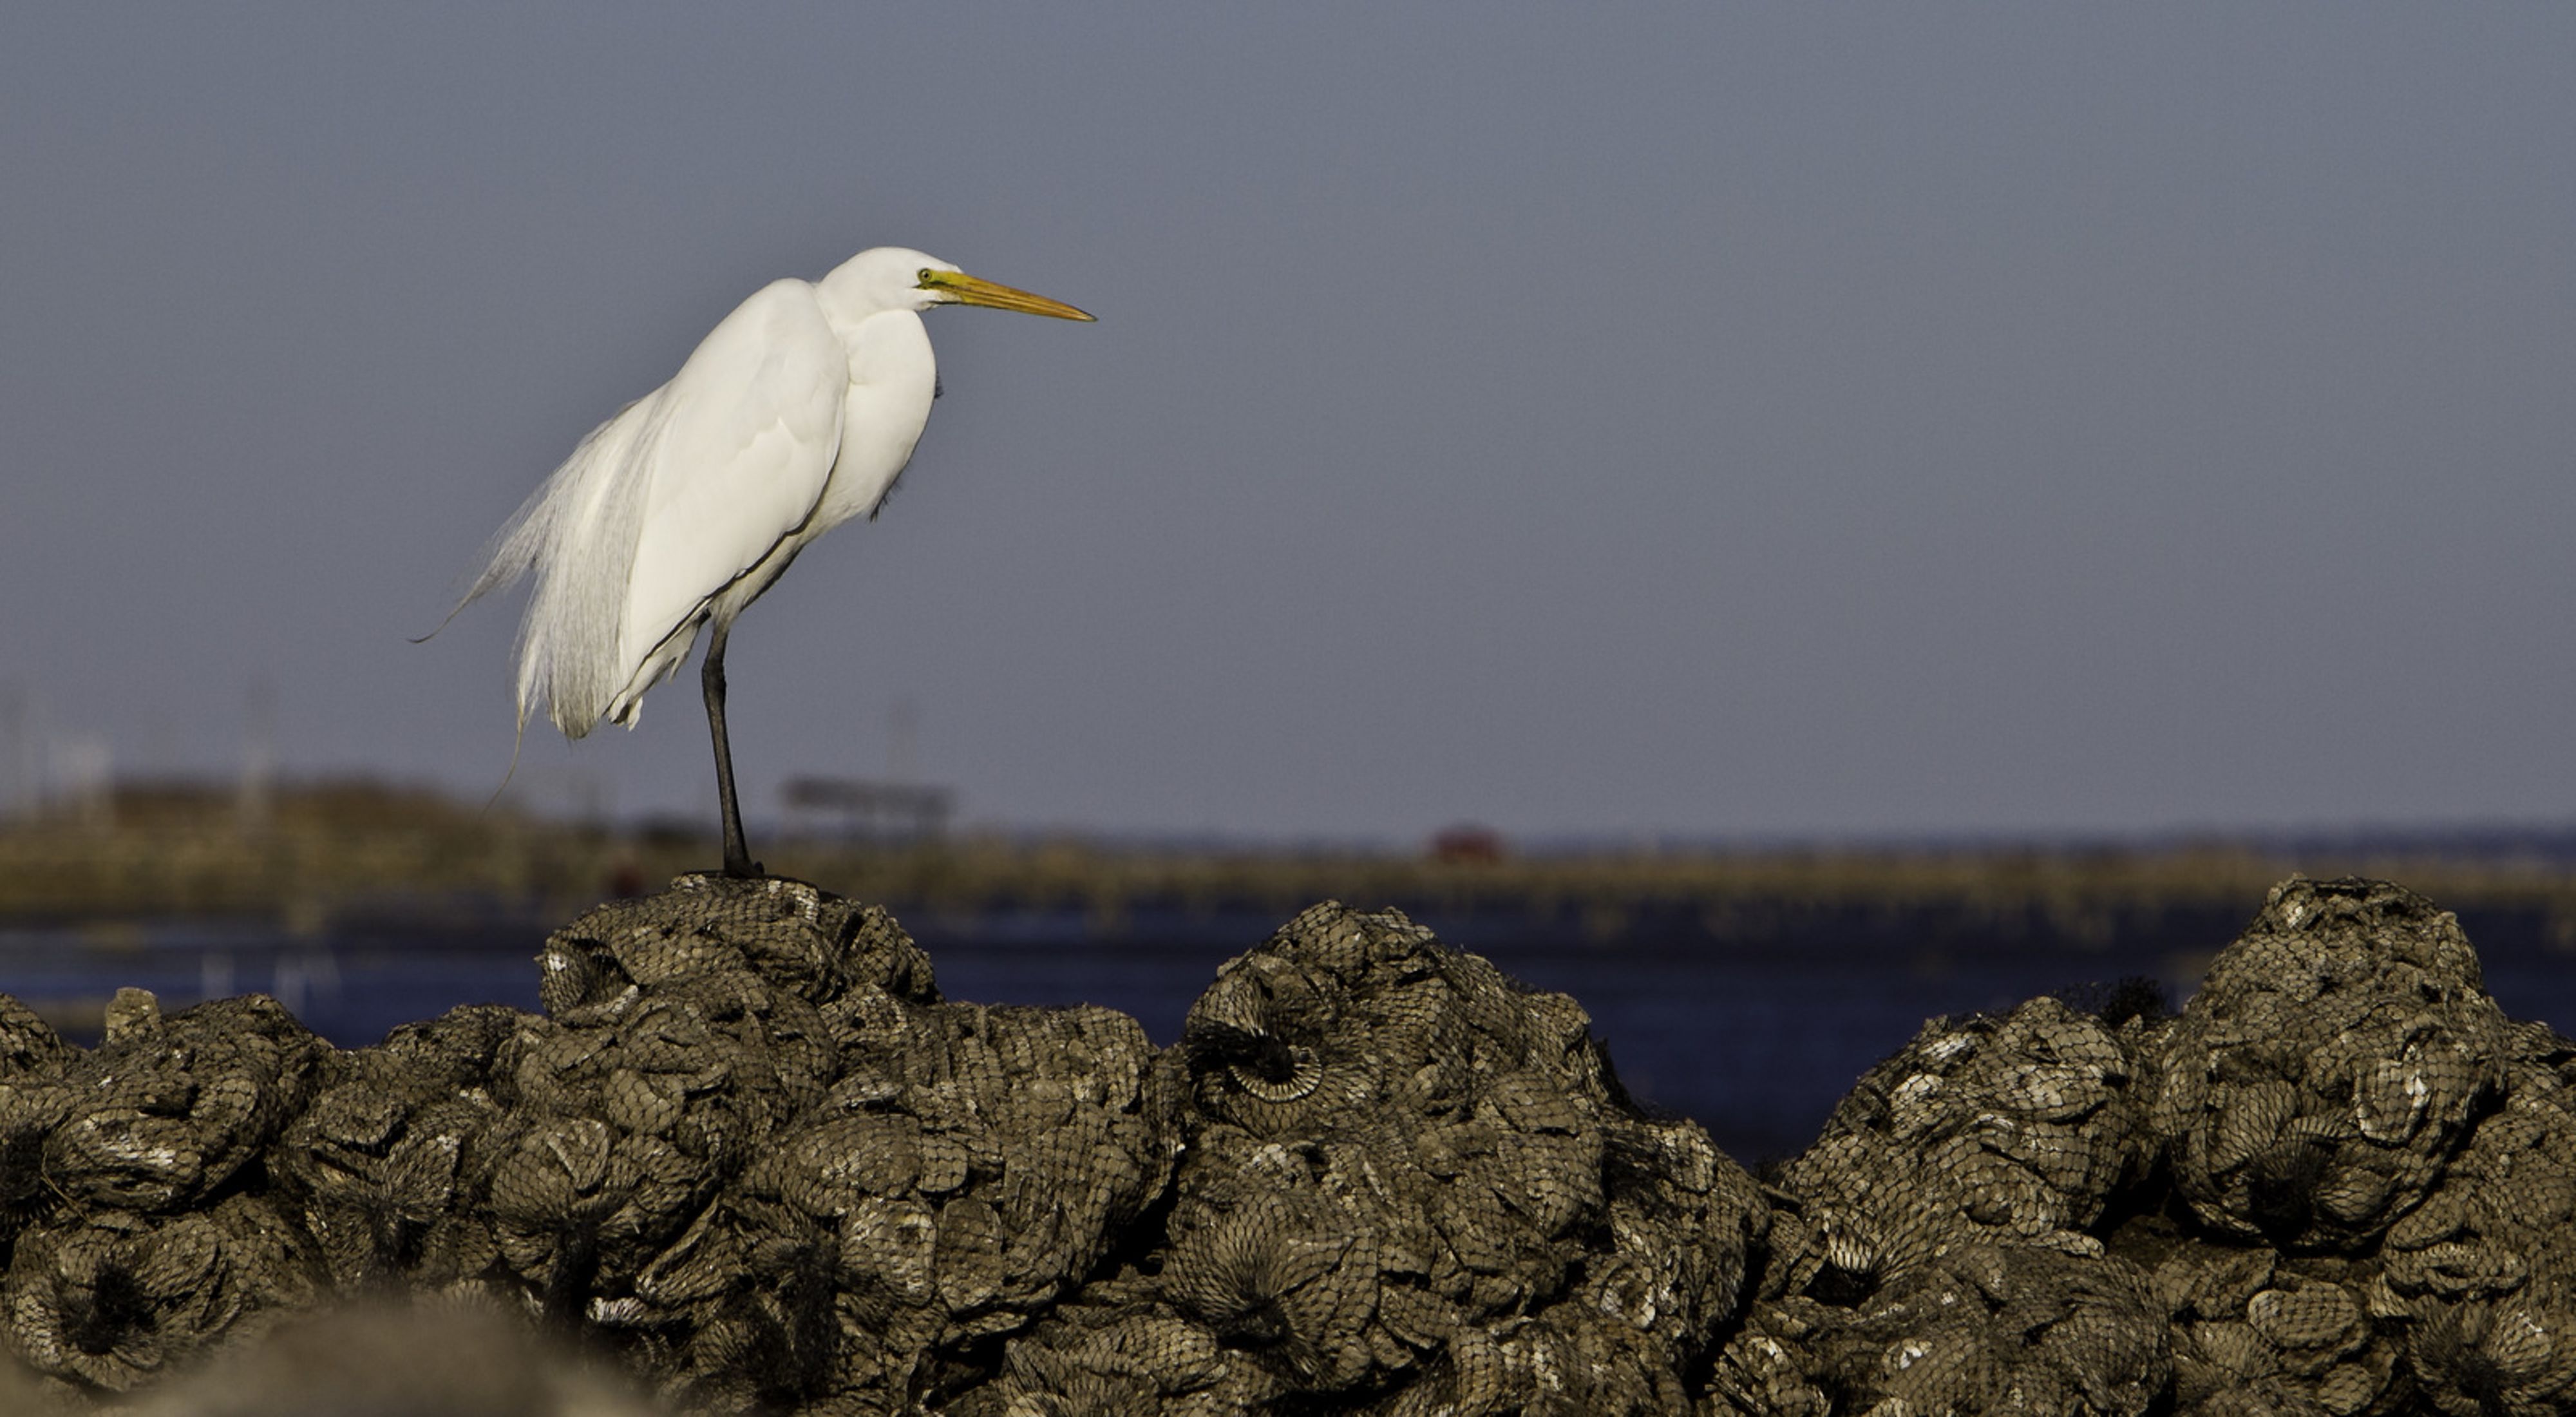 An egret sits on bags of oysters.